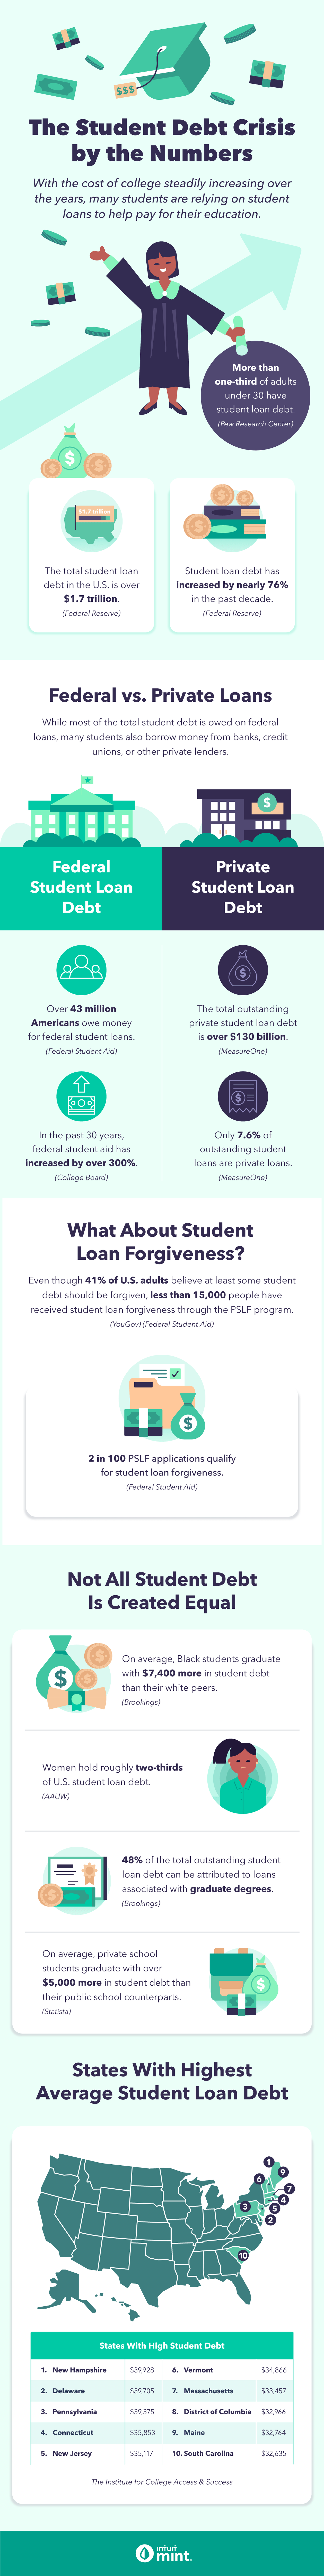 An infographic details various student loan debt statistics, ranging from loan types, location, borrower demographics, and more.